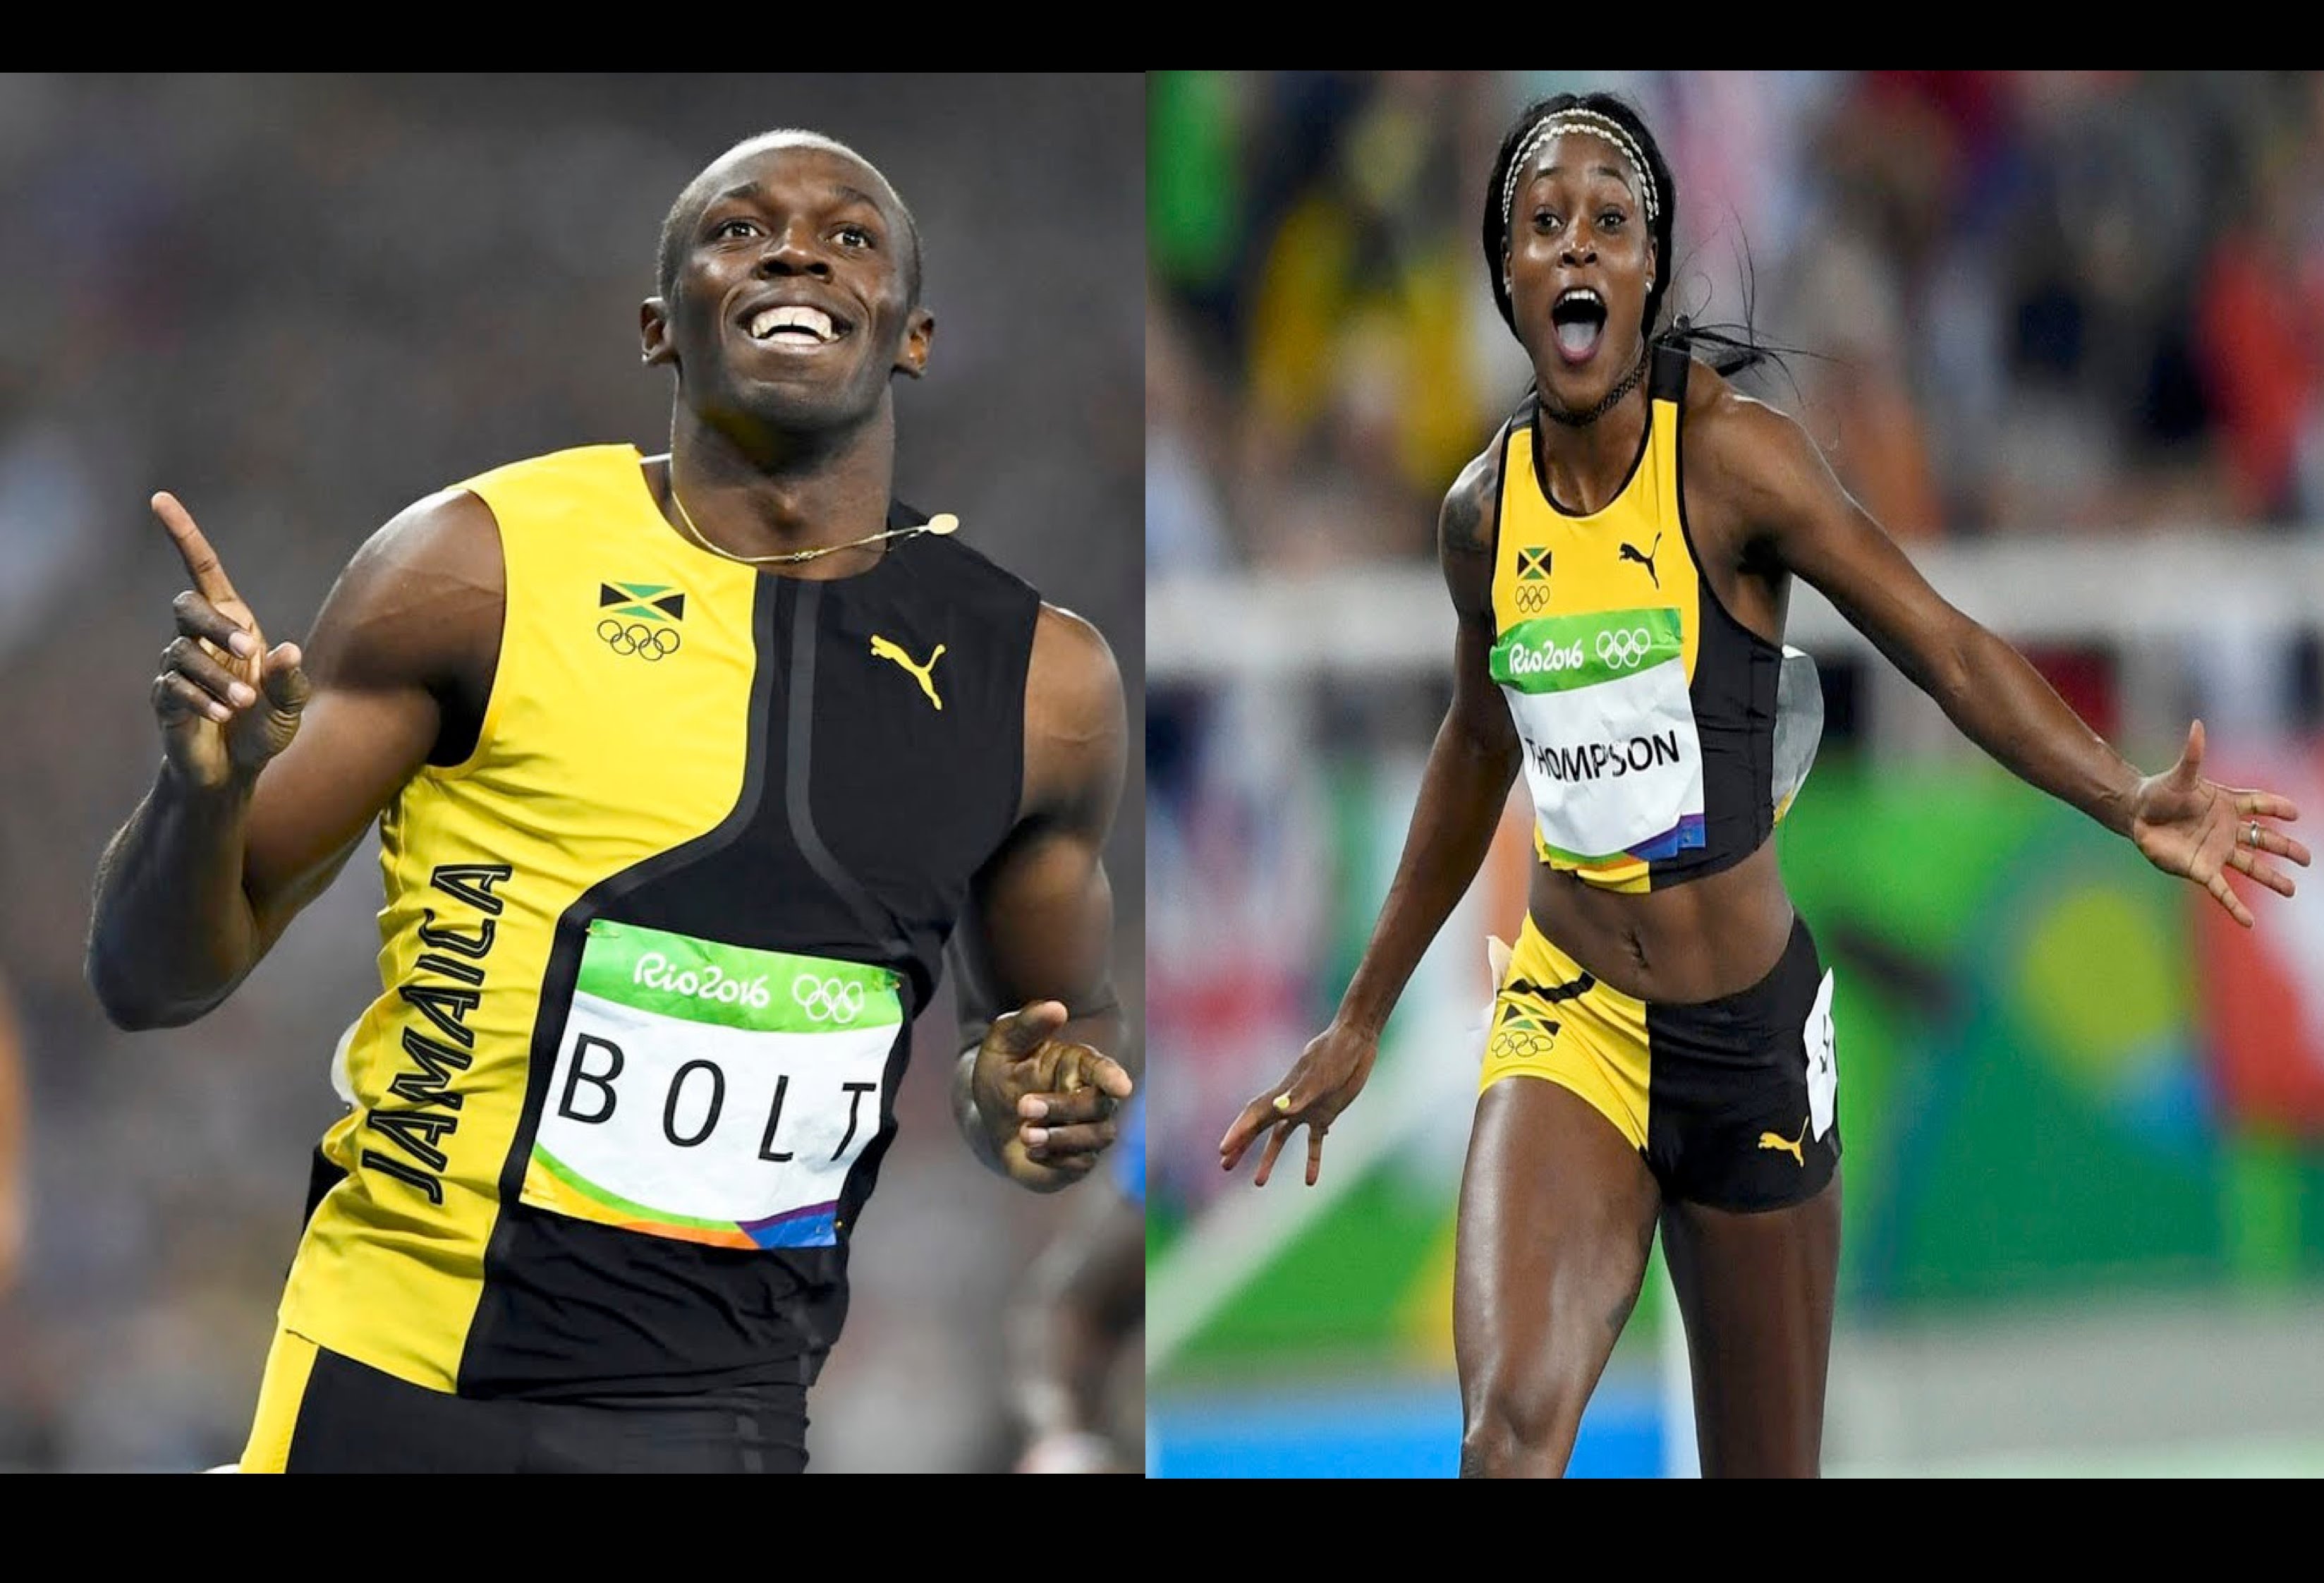 Thompson wins, Bolt gets 2nd in AW poll